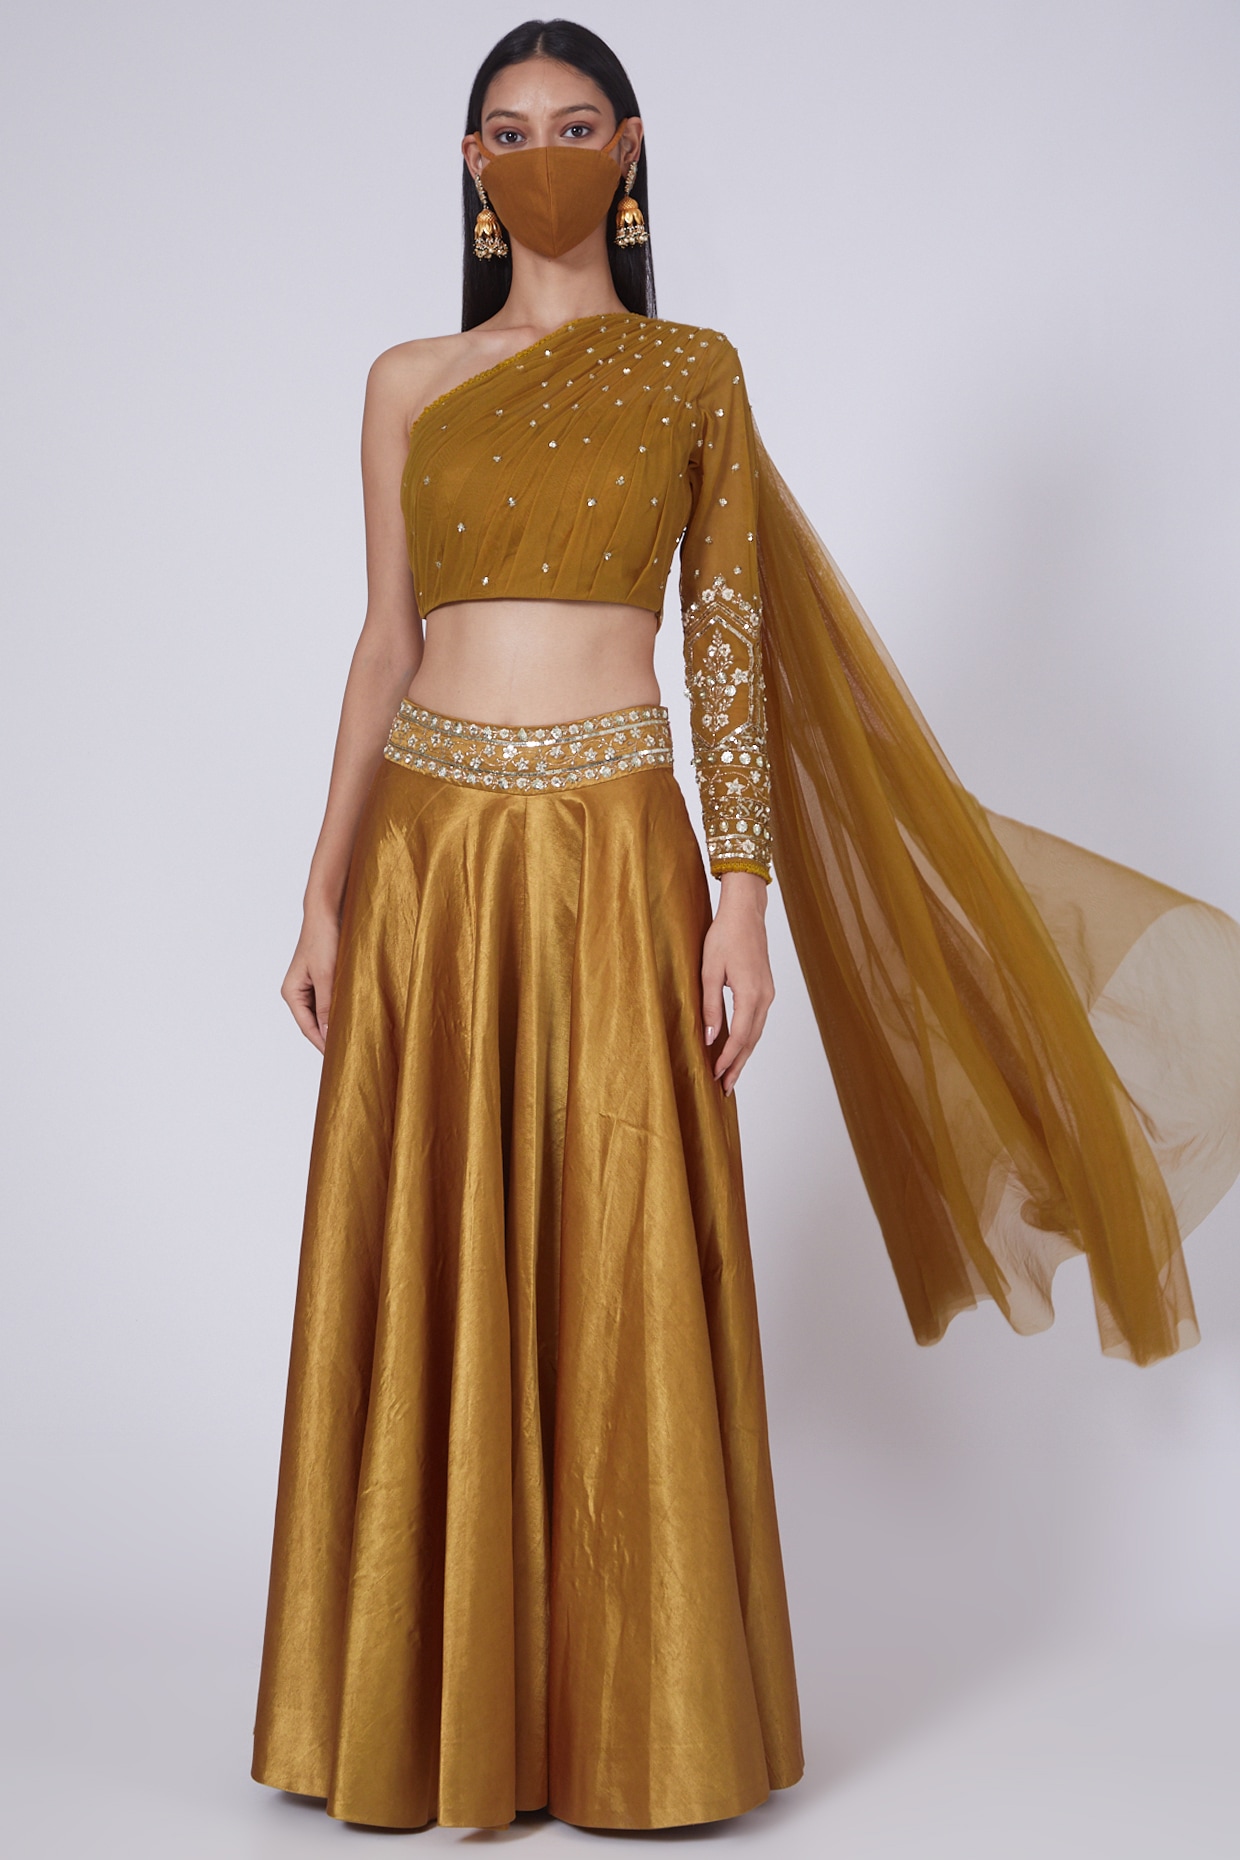 Choose Your High-waisted Lehenga Wisely With These Tips